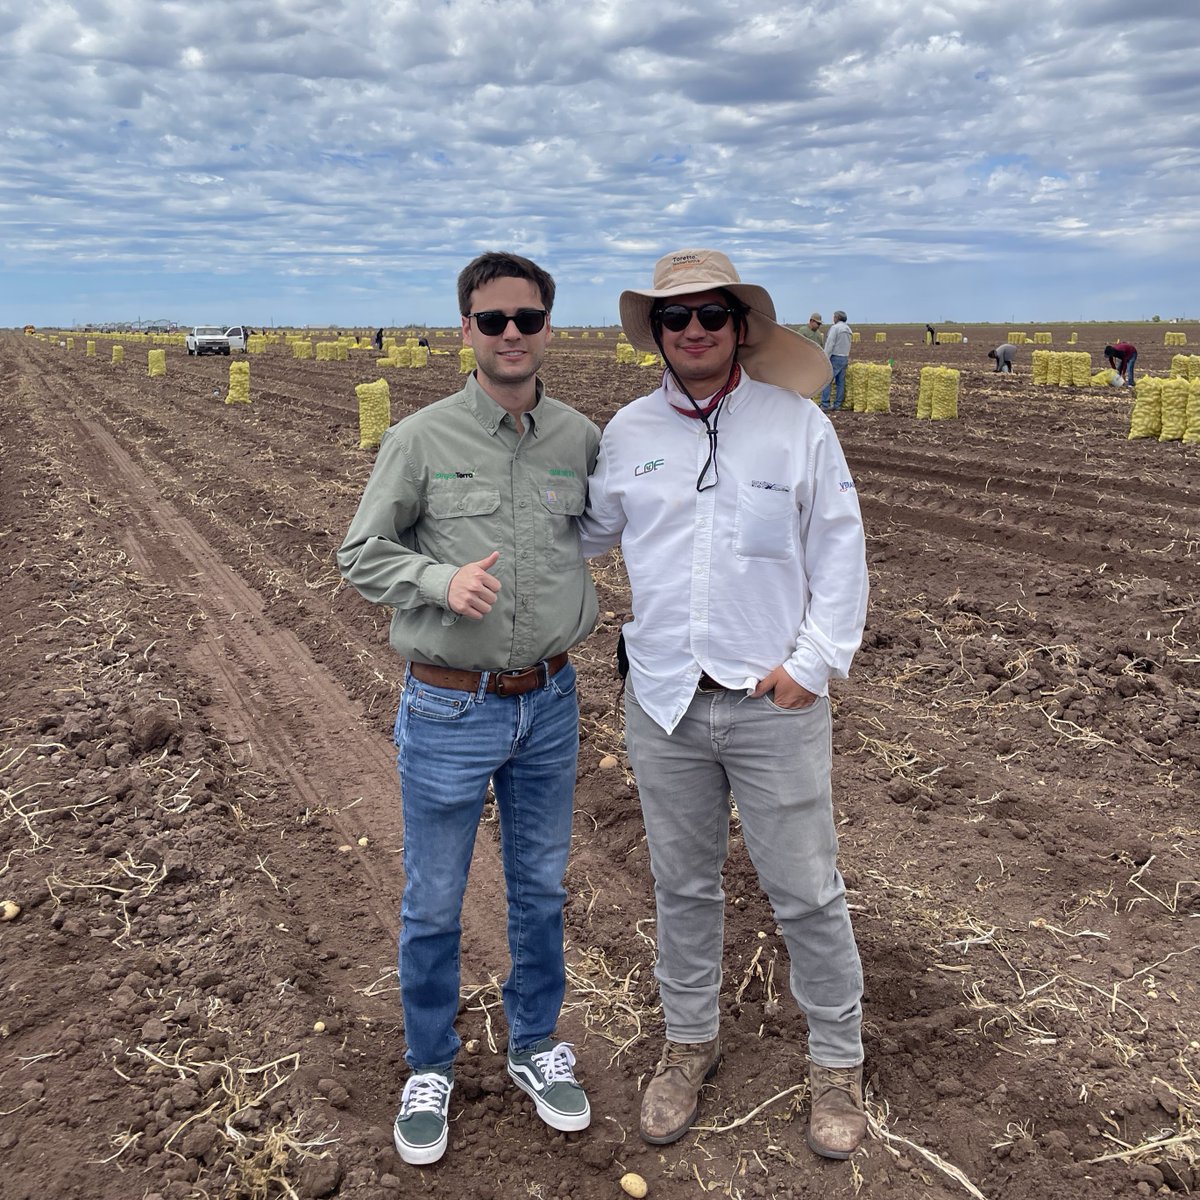 LofAgro and Rómulo Tachna of PhycoTerra® shared this summary of a recent potato trial for Agrícola Barceló. The results: Control: 45 tons/ha PhycoTerra® 4L: 47.8 tons/ha (+6.2%) PhycoTerra® 6L: 49.8 tons/ha (+10.6%)